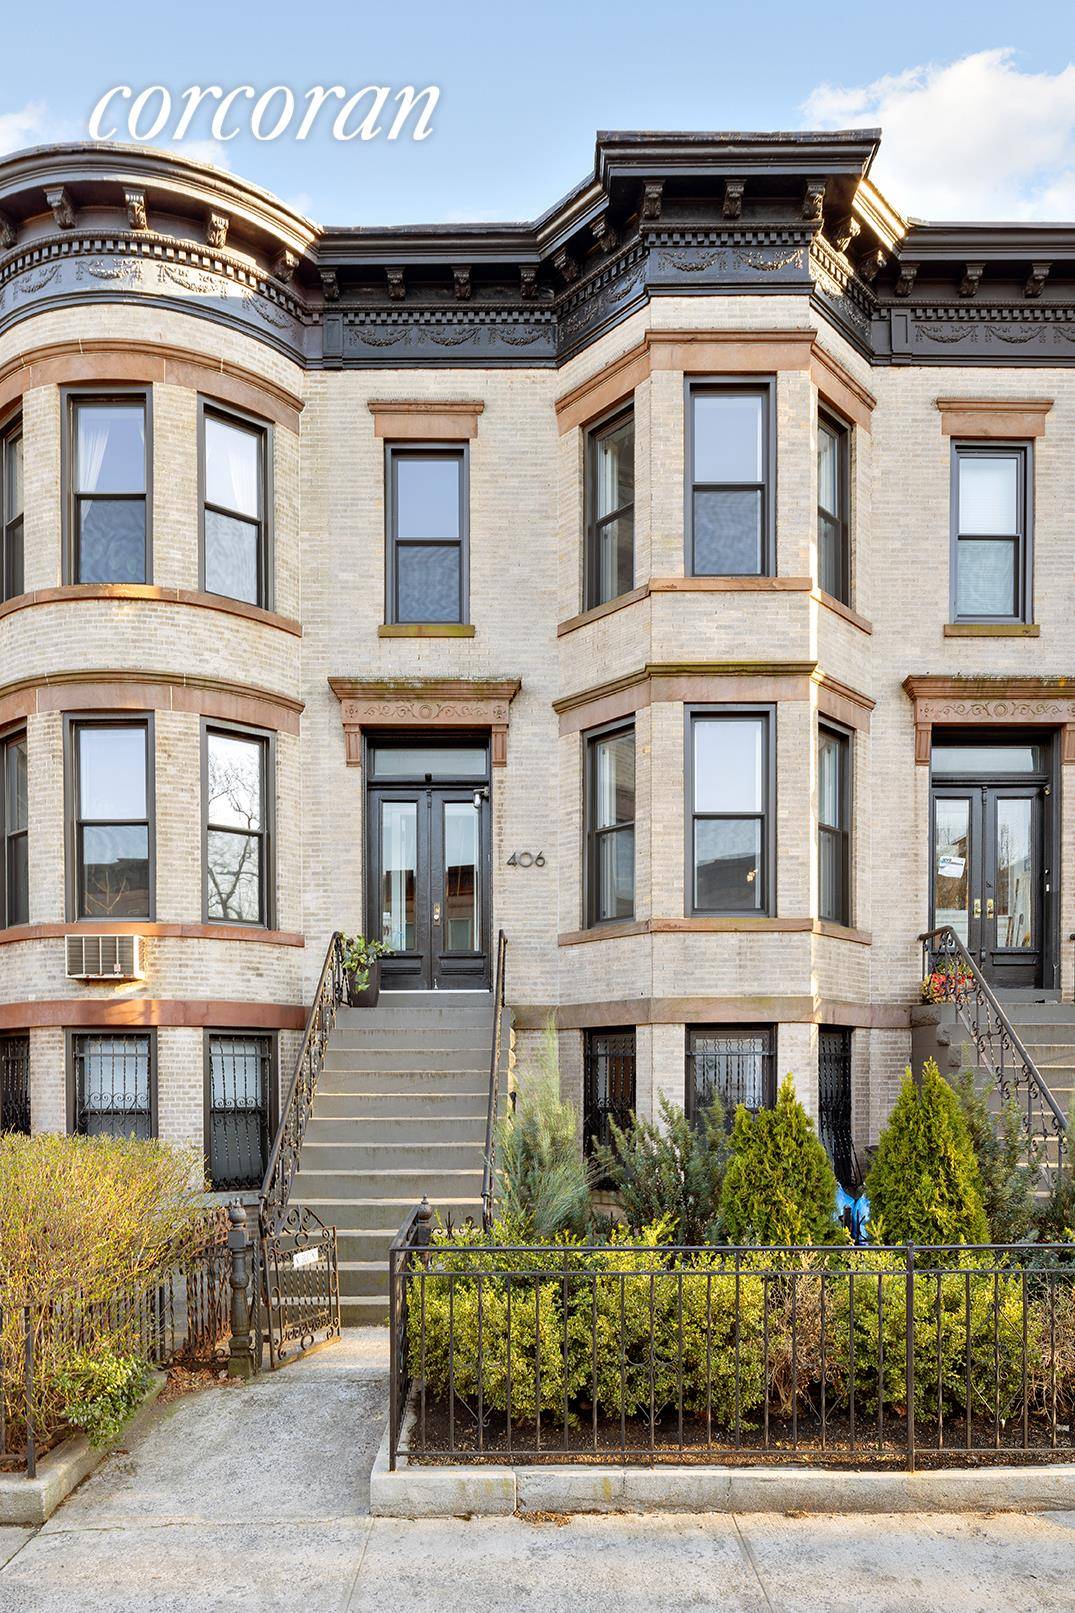 Exquisitely Renovated amp ; Restored, Two Family, Turn of the Century Brooklyn Townhouse This brick beauty is dripping with original details including crown moldings, ornate plaster work, stunning archways and ...